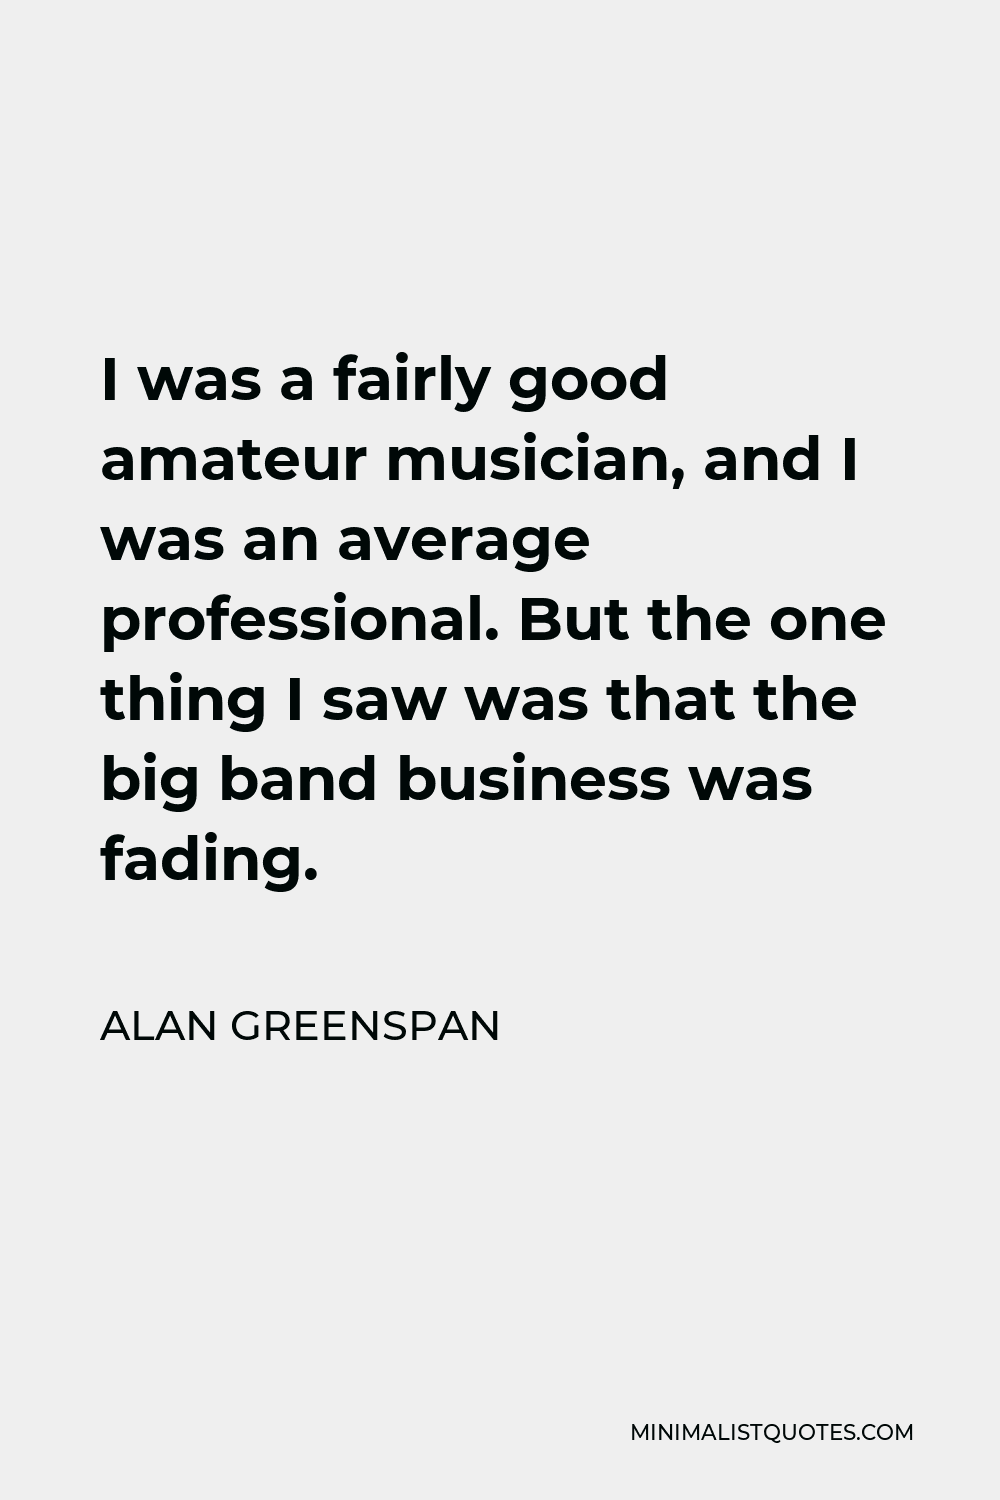 Alan Greenspan Quote - I was a fairly good amateur musician, and I was an average professional. But the one thing I saw was that the big band business was fading.